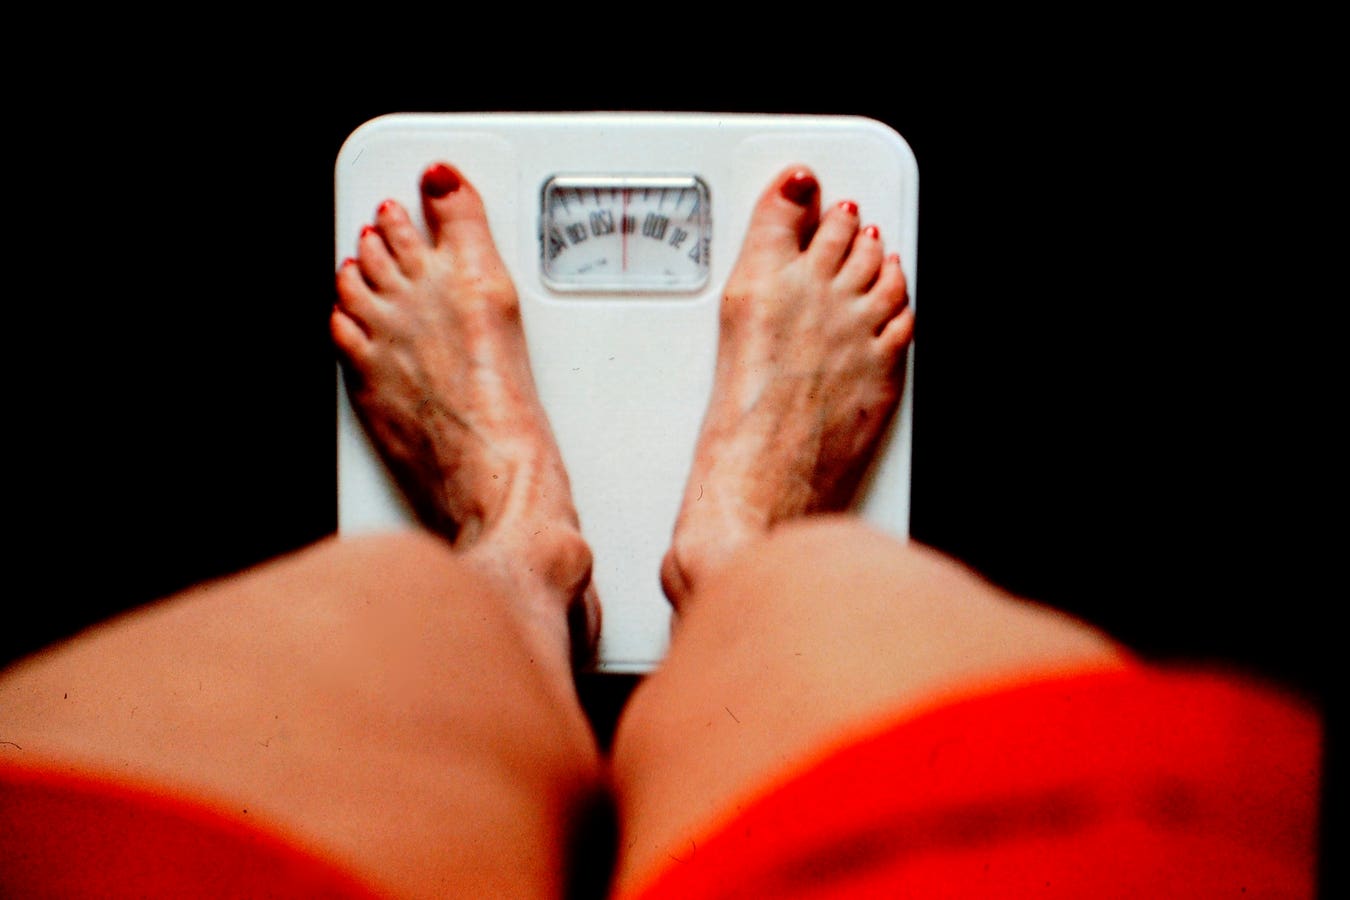 Family pressure to lose weight during adolescence linked to internalized weight stigma